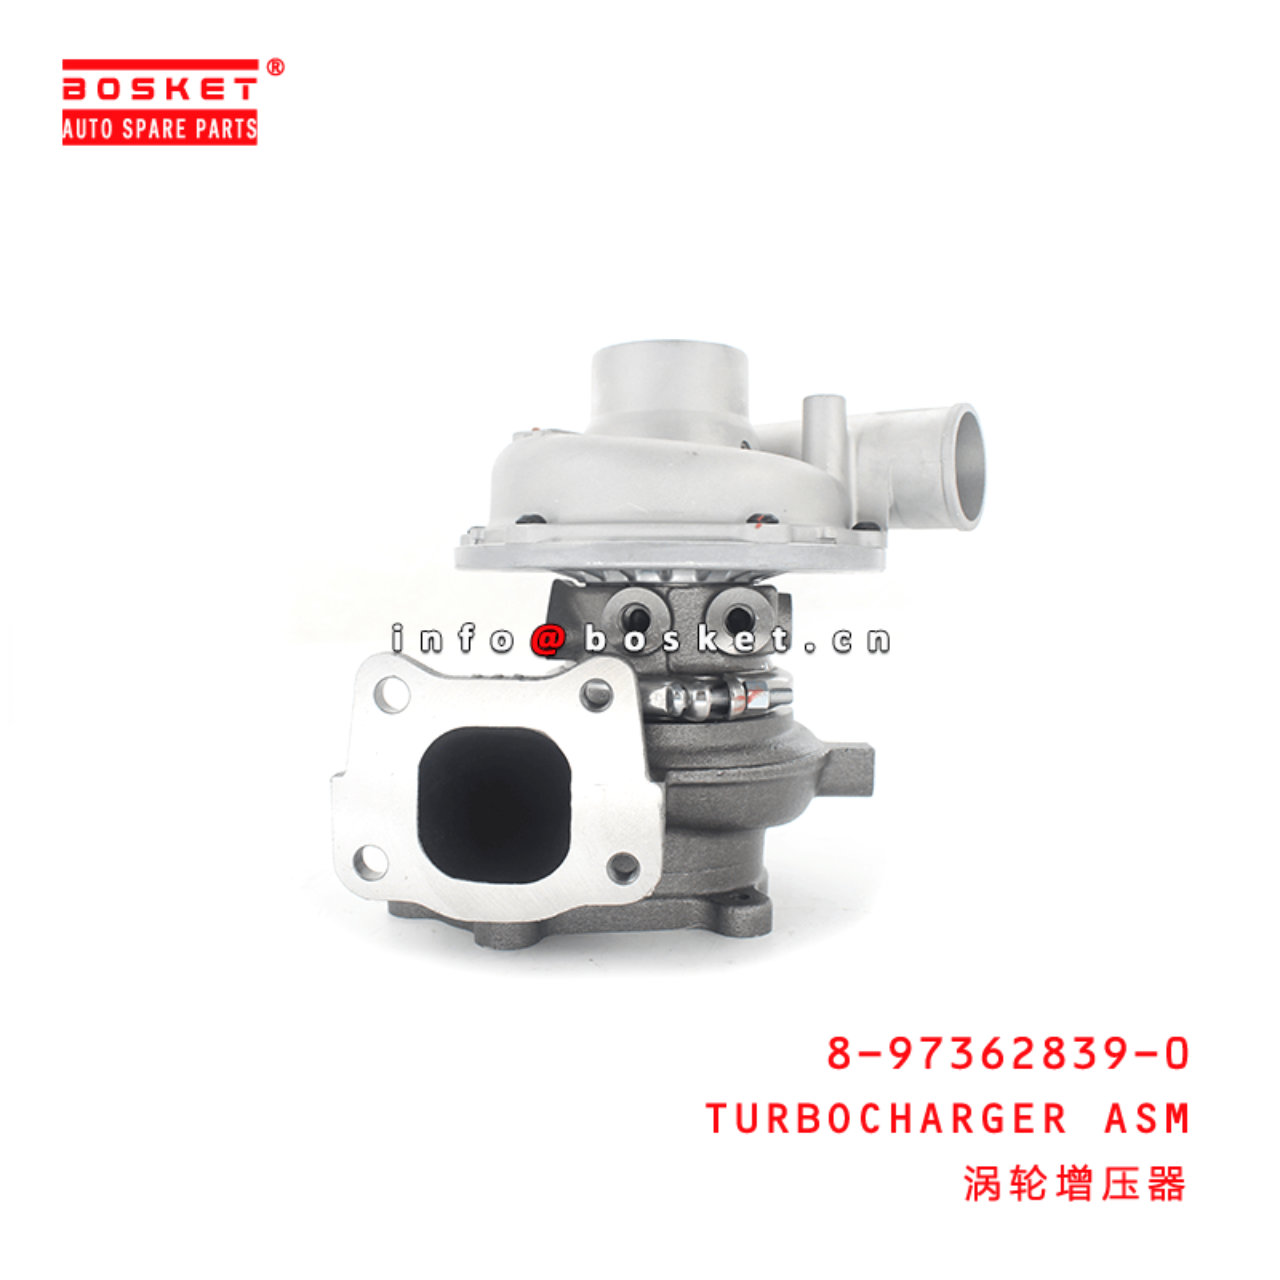 8-97362839-0 Turbocharger Assembly 8973628390 Suitable for ISUZU XD 4HK1